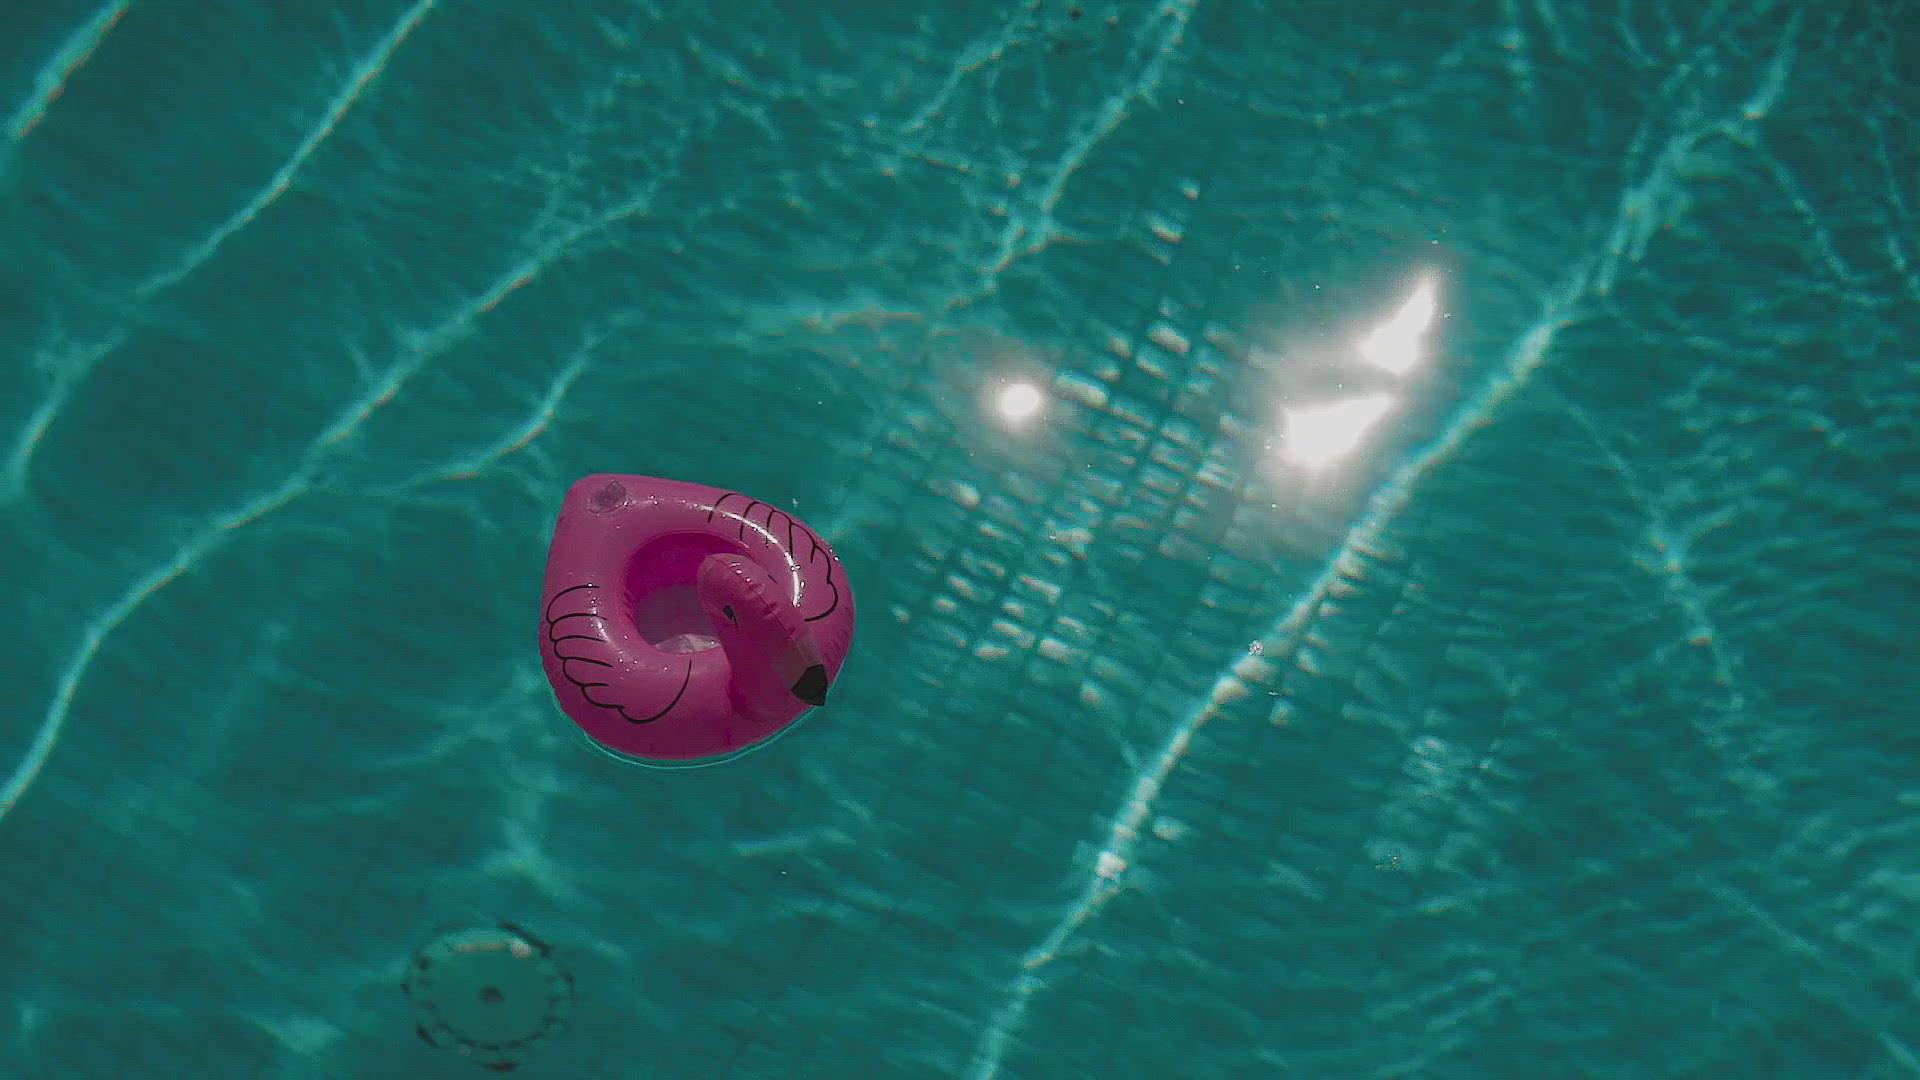 'Video thumbnail for Inflatable Floater in Pool'